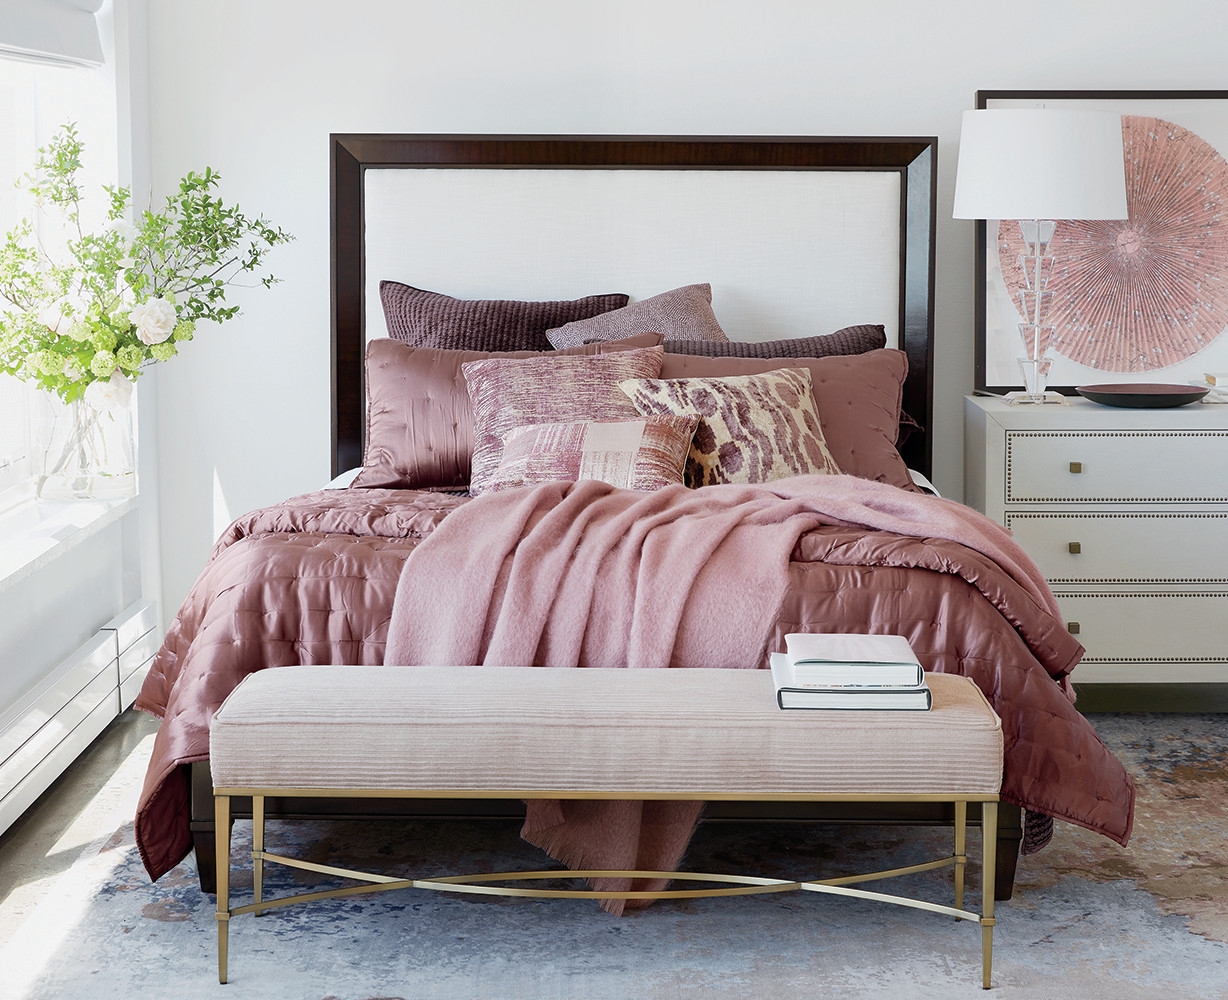 Bed Using Antique Rose Colored Bedding